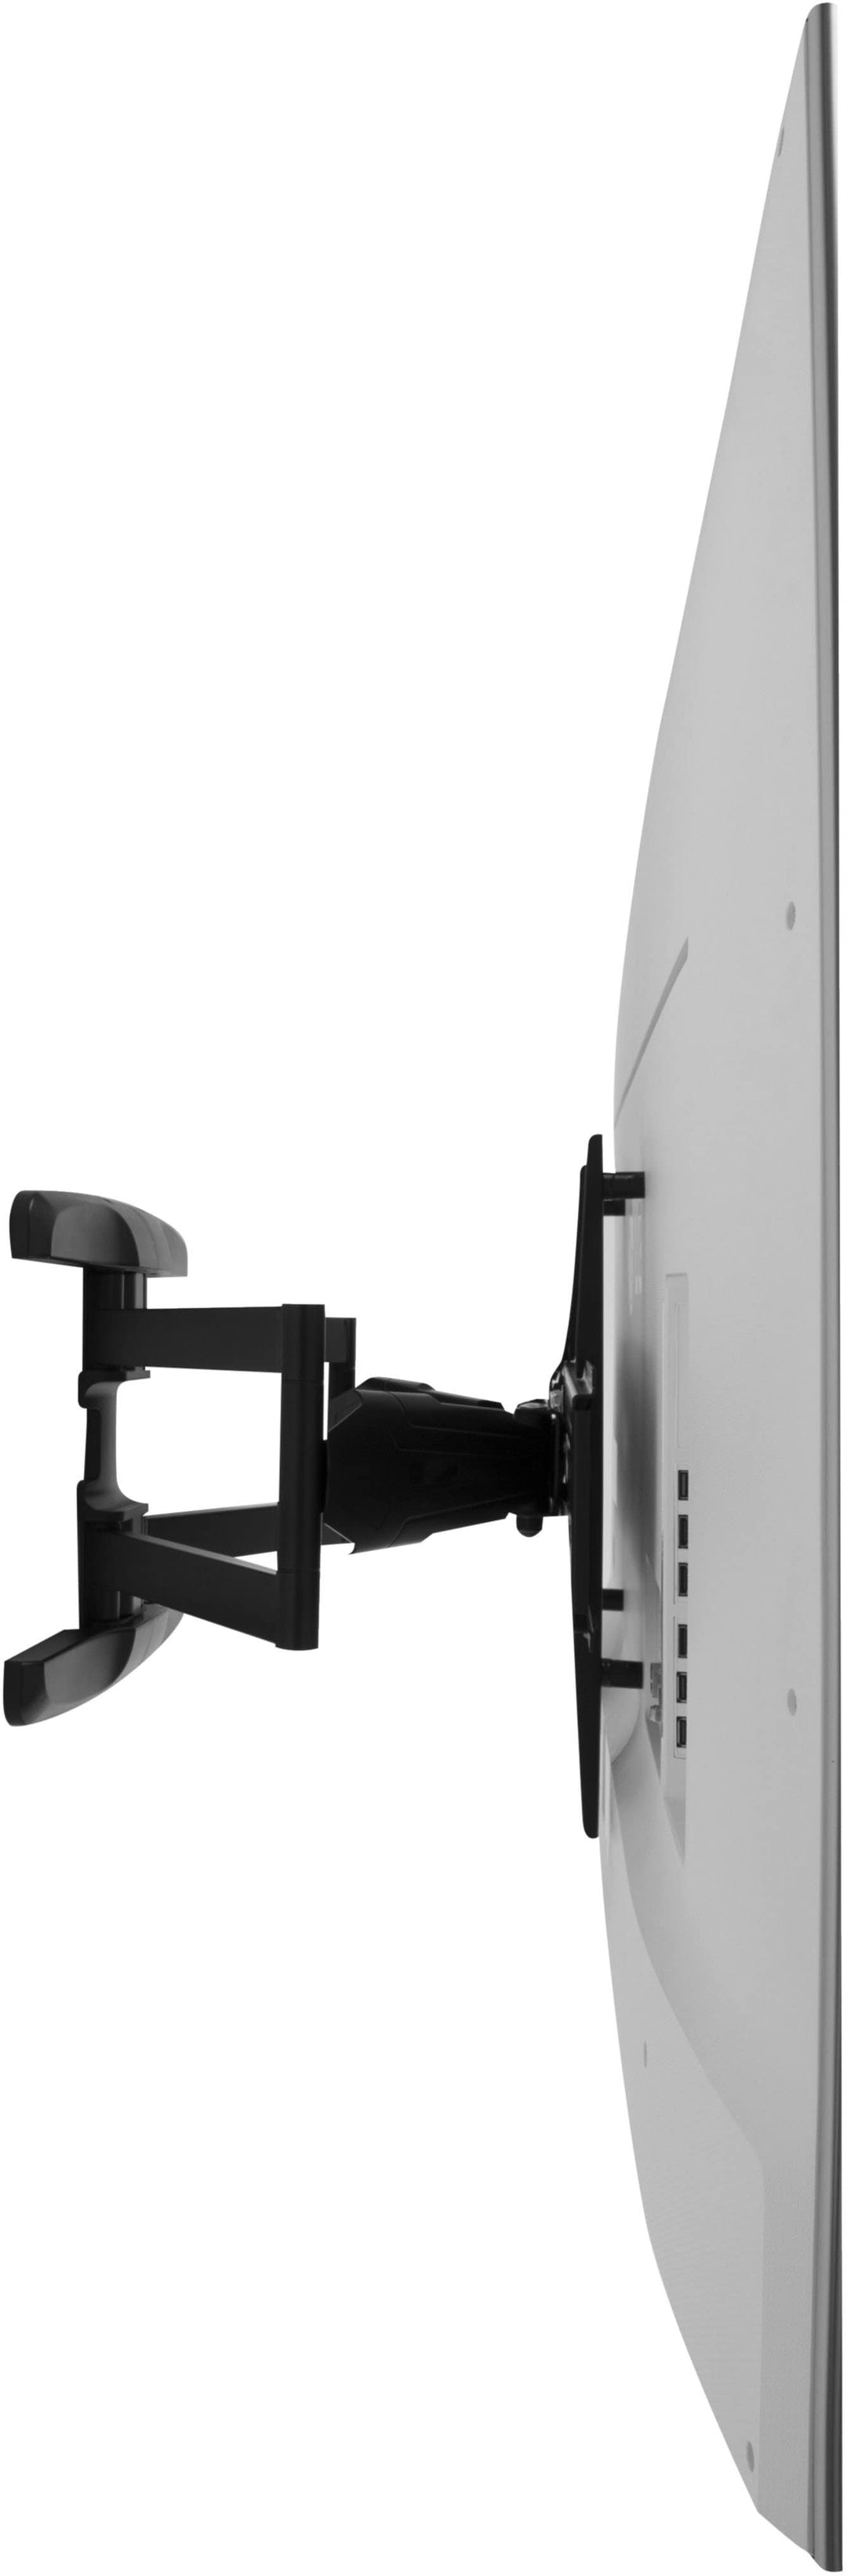 Insignia™ - Full-Motion Wall Mount for 47" - 90" TVs up to 130 lbs. - Extends 25.2” - Black_7